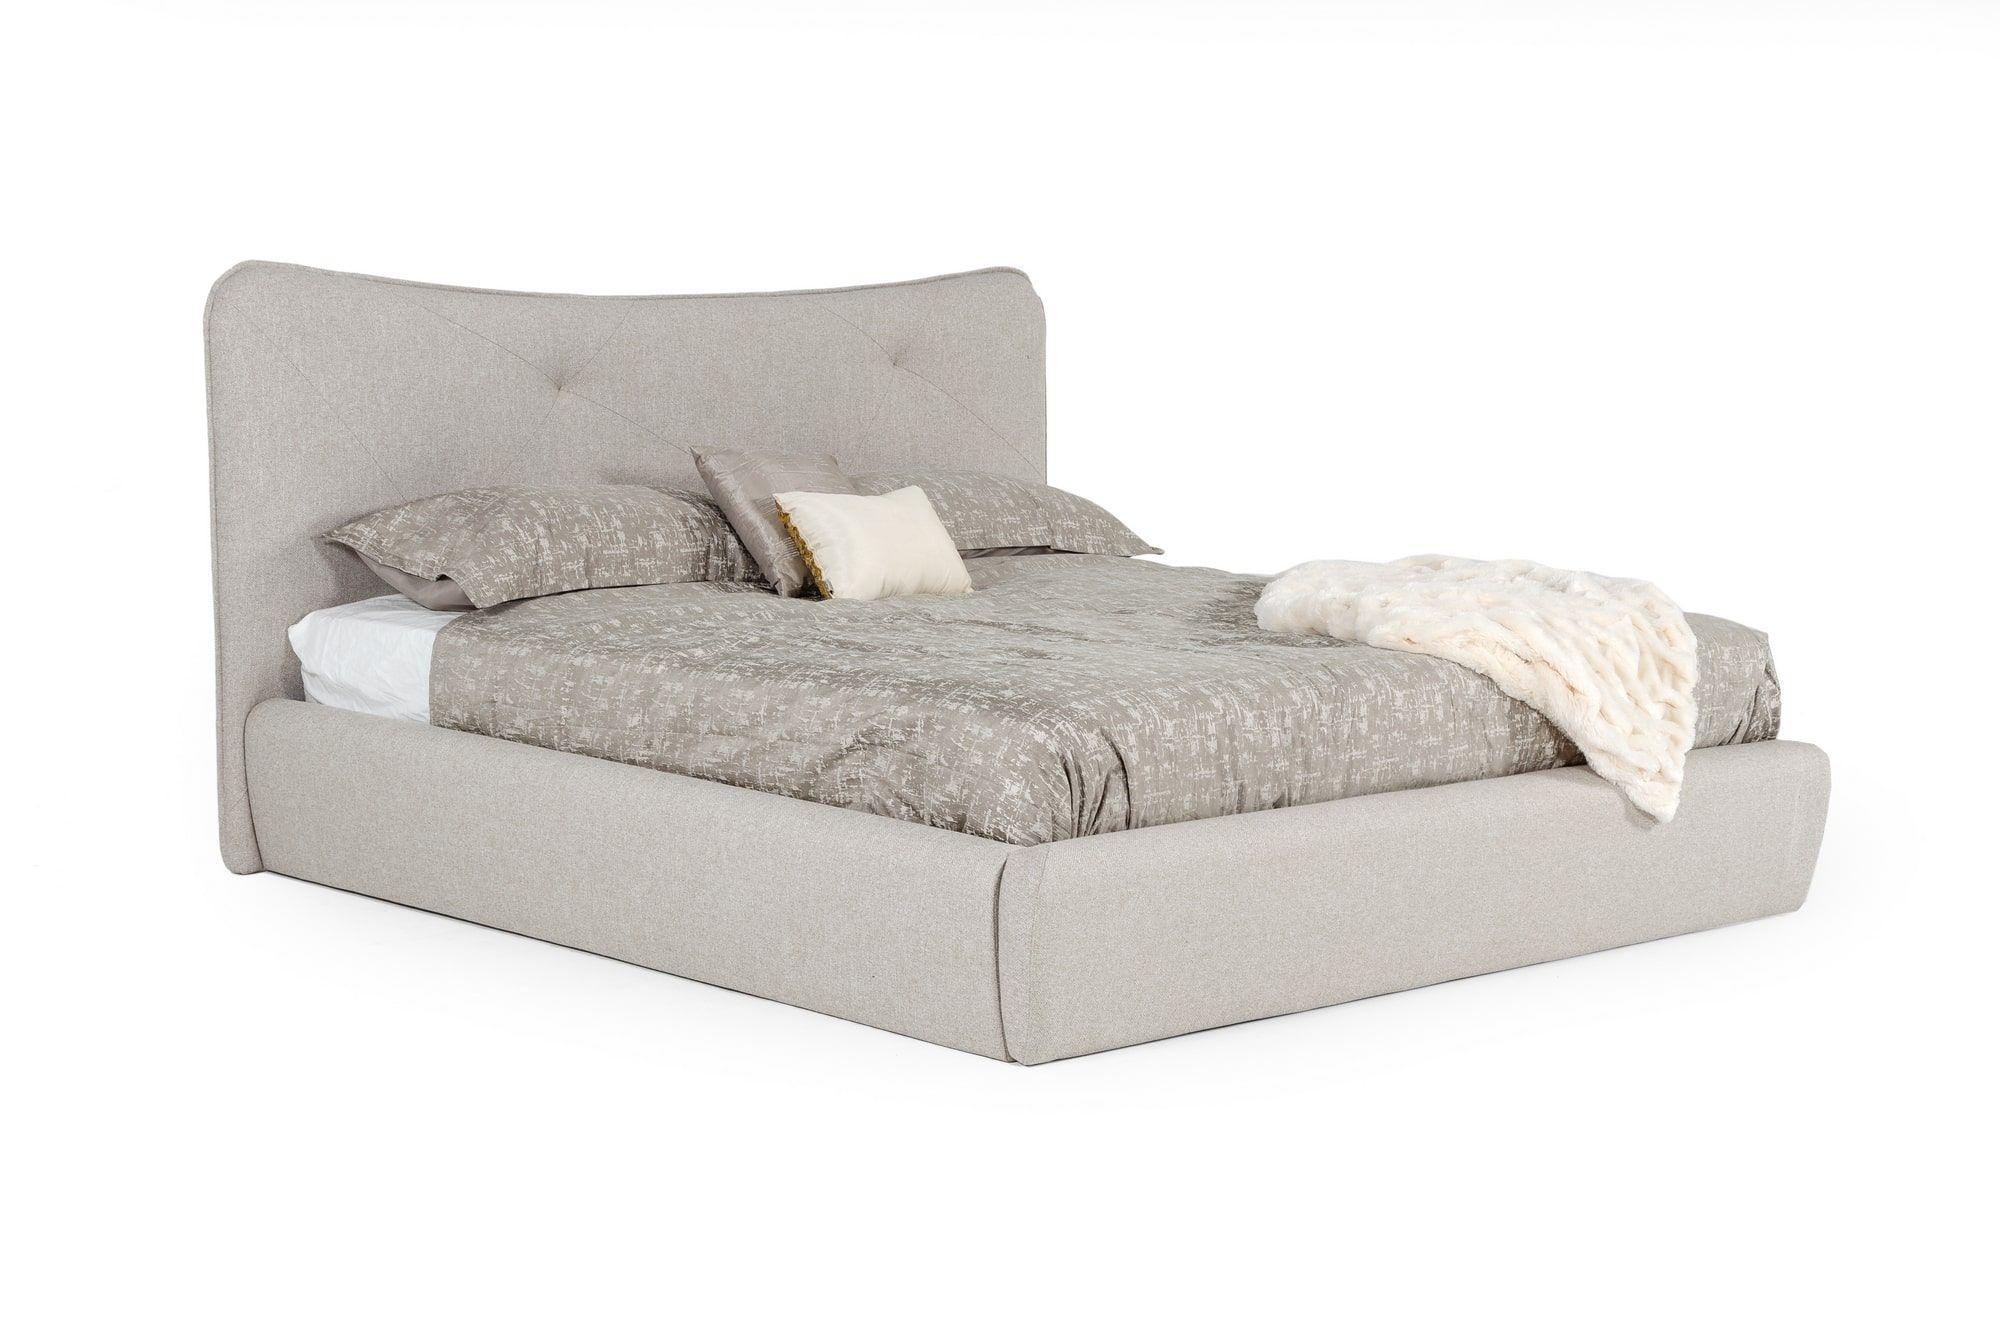 

    
Light Grey Upholstered Queen Bed Modrest Alessia VIG Modern MADE IN ITALY
